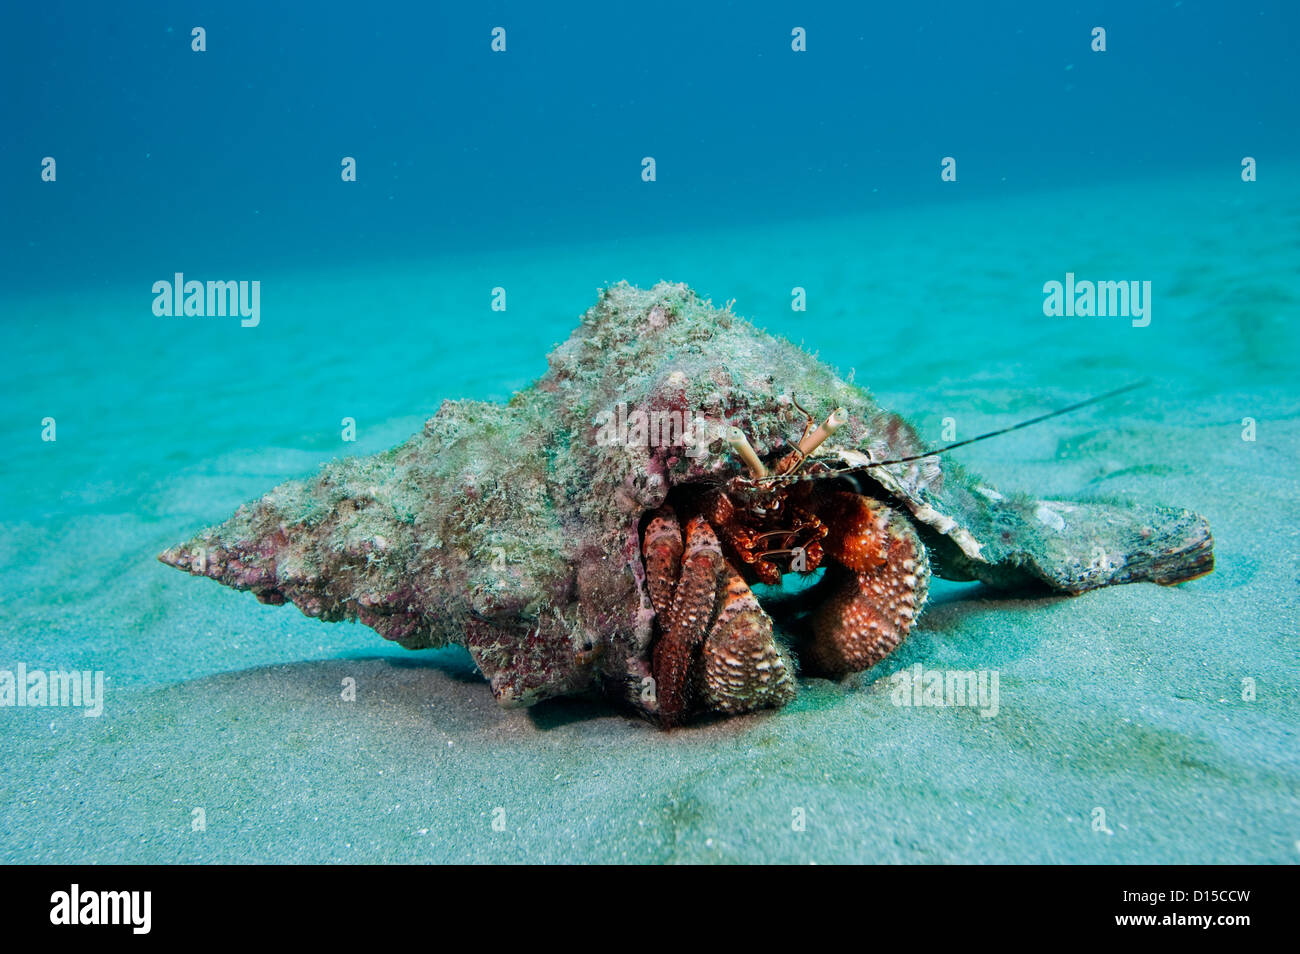 Giant Red Hermit Crab, Petrochirus diogenes, photographed offshore Palm Beach, Florida, United States. Stock Photo